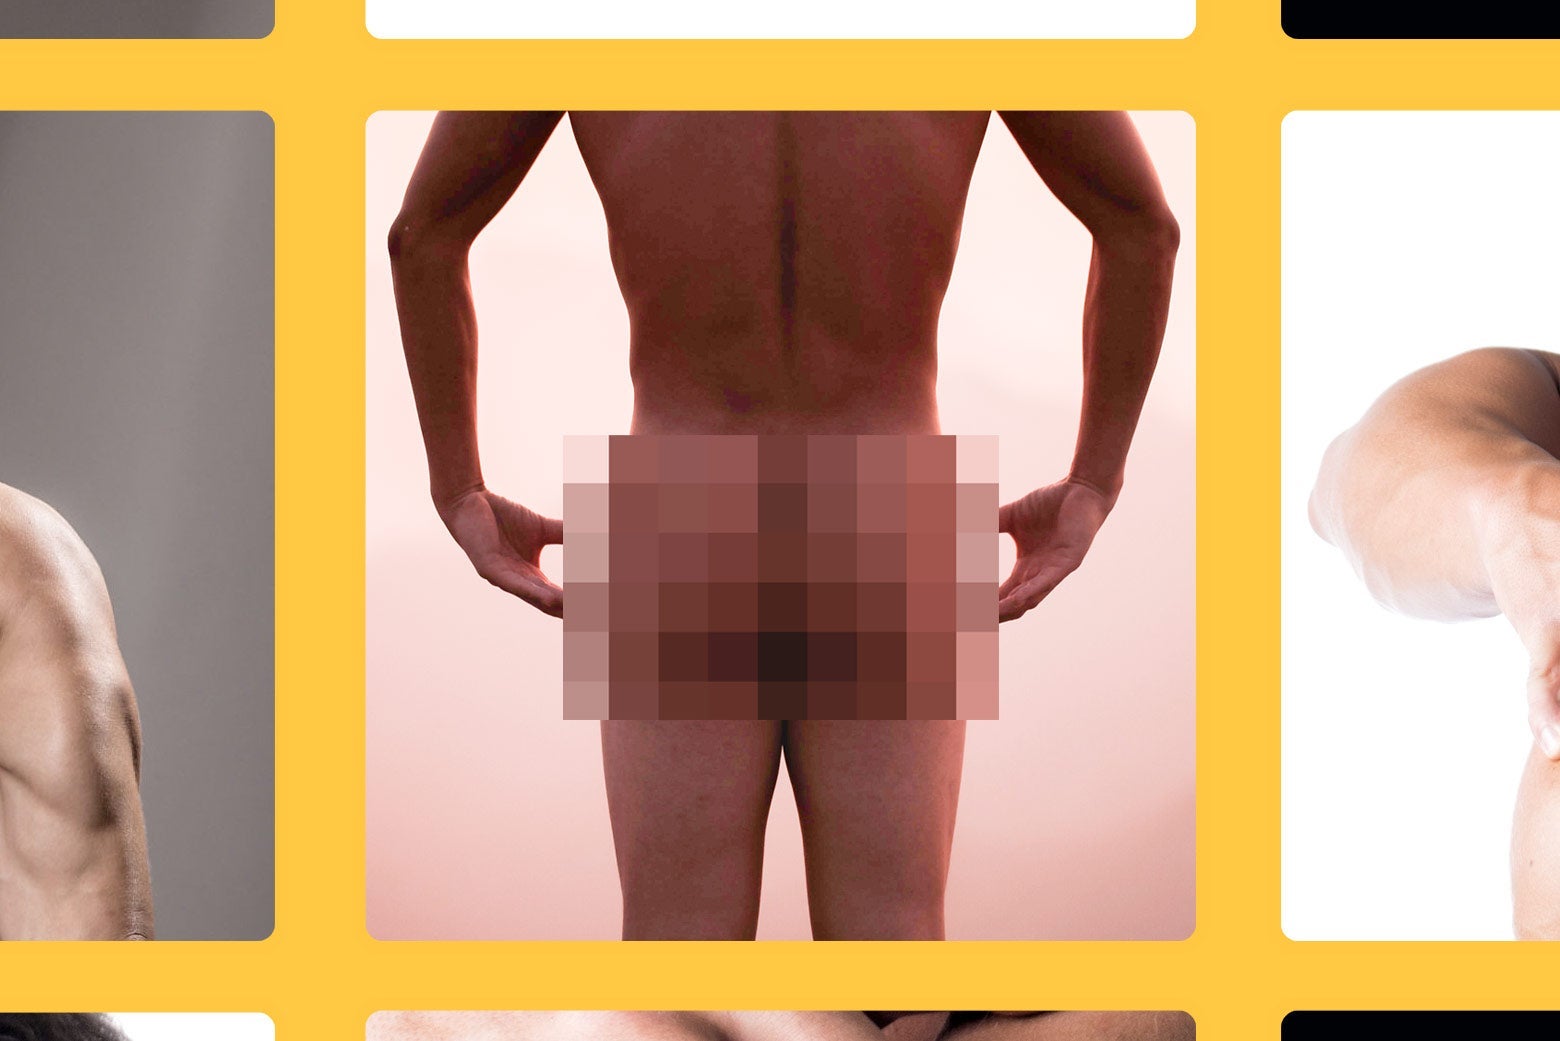 Grindr Whats behind the new rule thats surprising users? pic pic